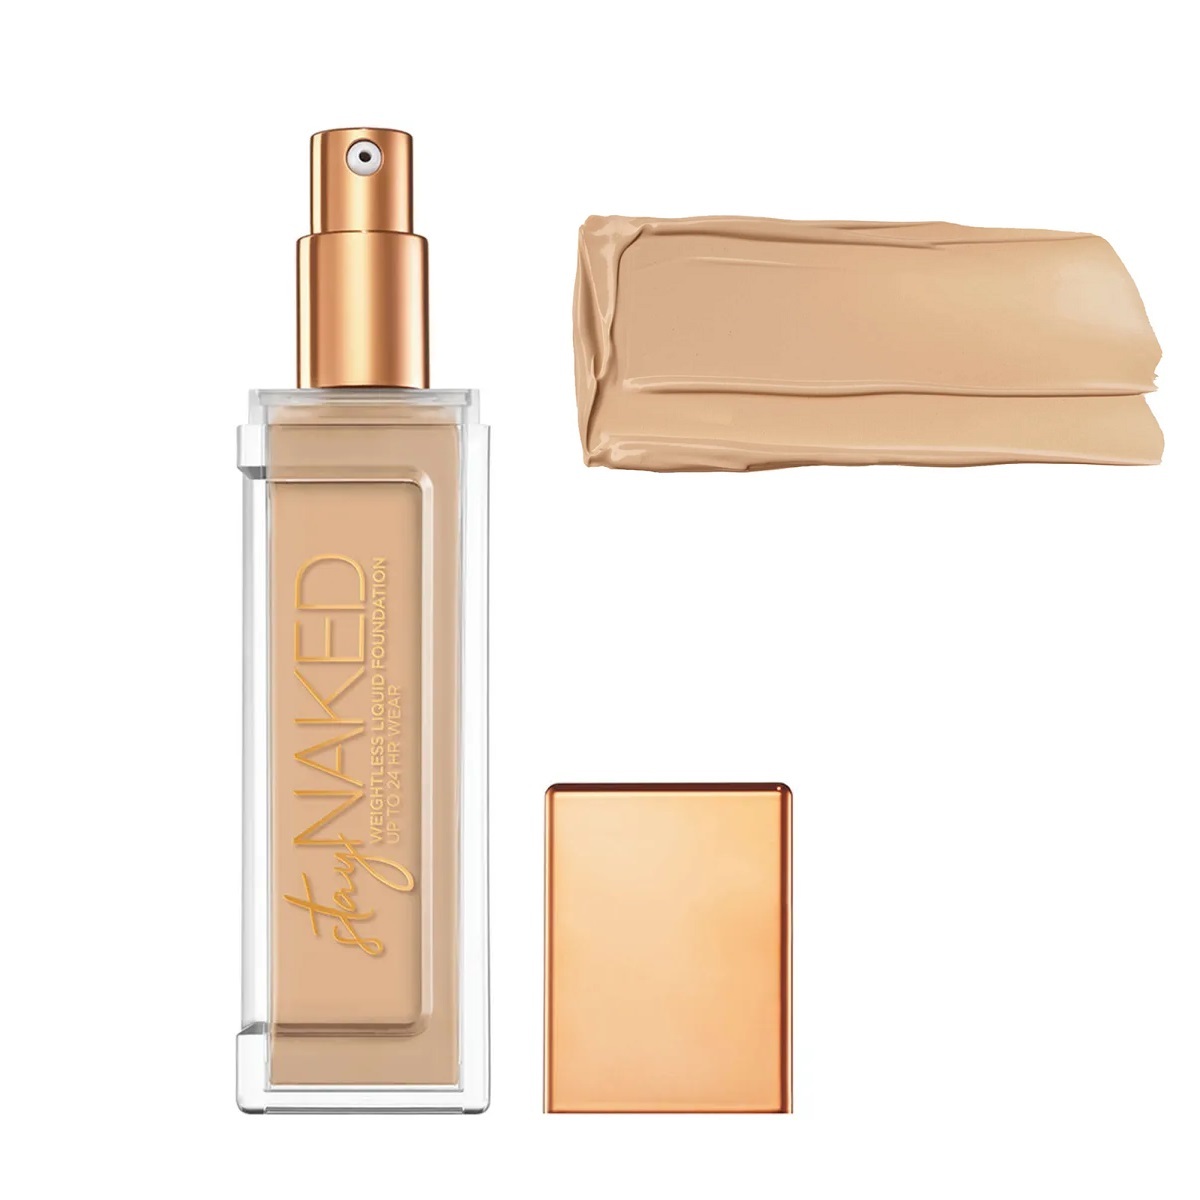 Stay Naked Weightless Liquid Foundation #20NN 30ml (parallel import)